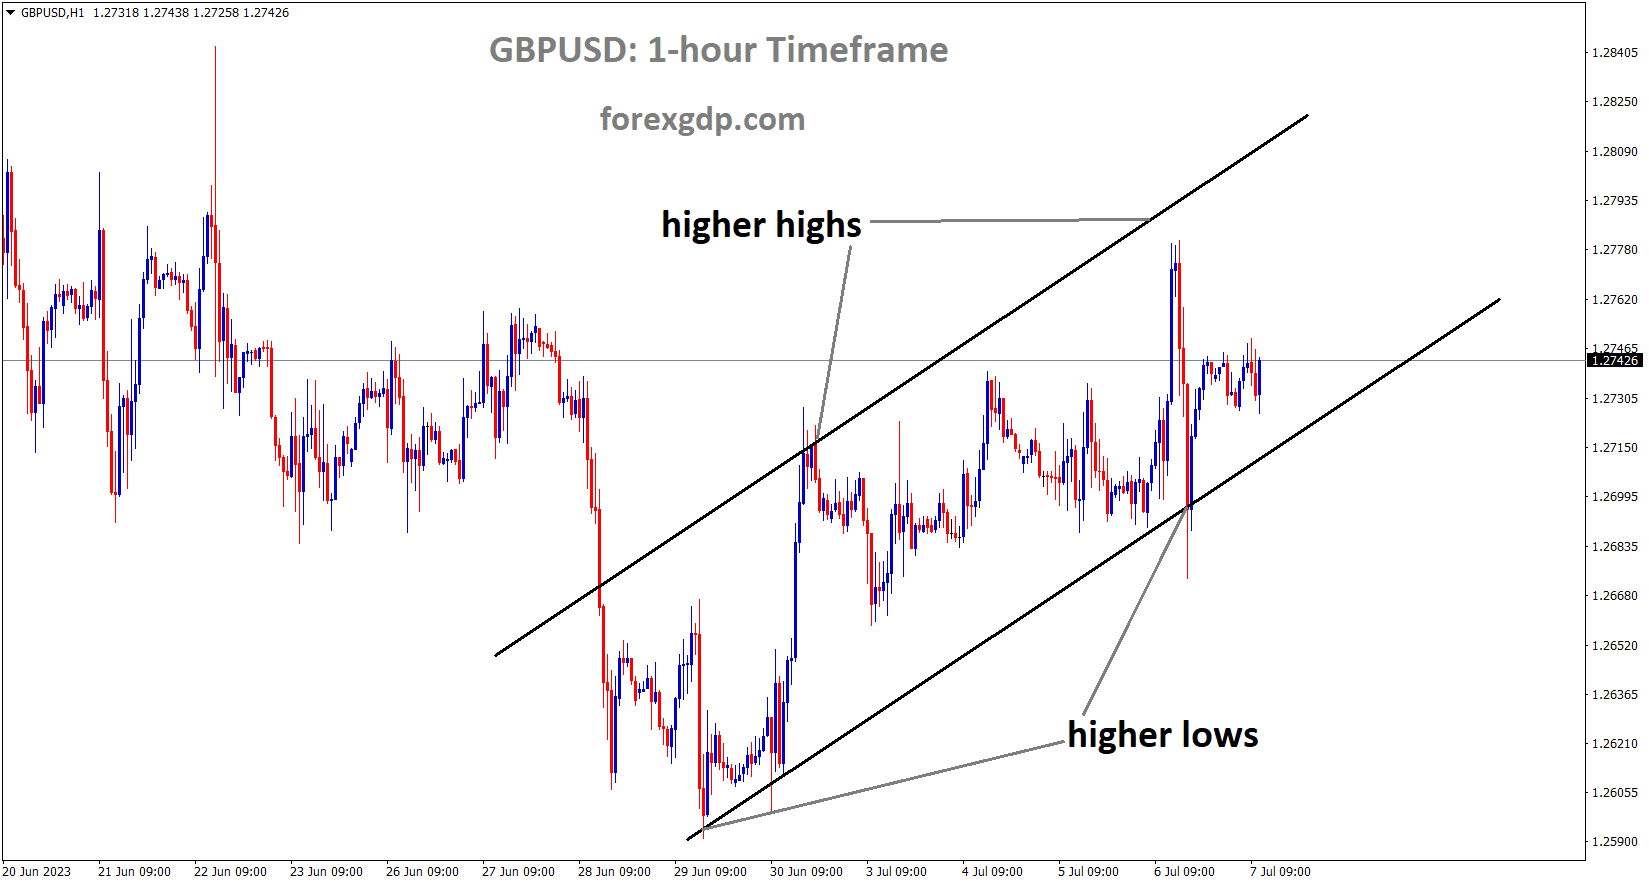 GBPUSD is moving in an Ascending Channel and the market has rebounded from the higher low area of the channel